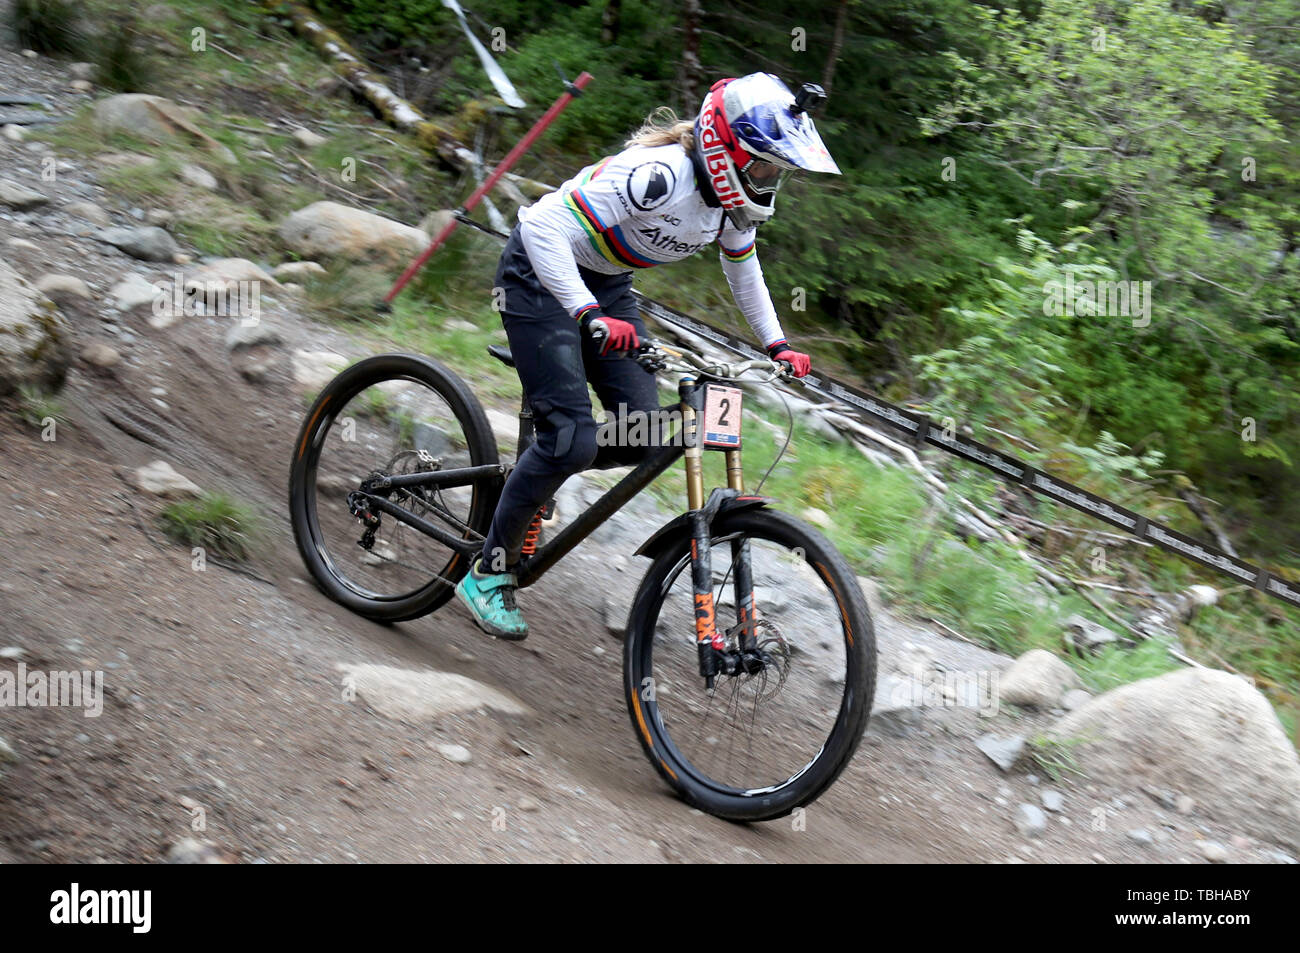 Great Britain's Rachel Atherton in the Women's Downhill Qualifying Round during the UCI Mountain Bike World Cup at Fort William. Stock Photo